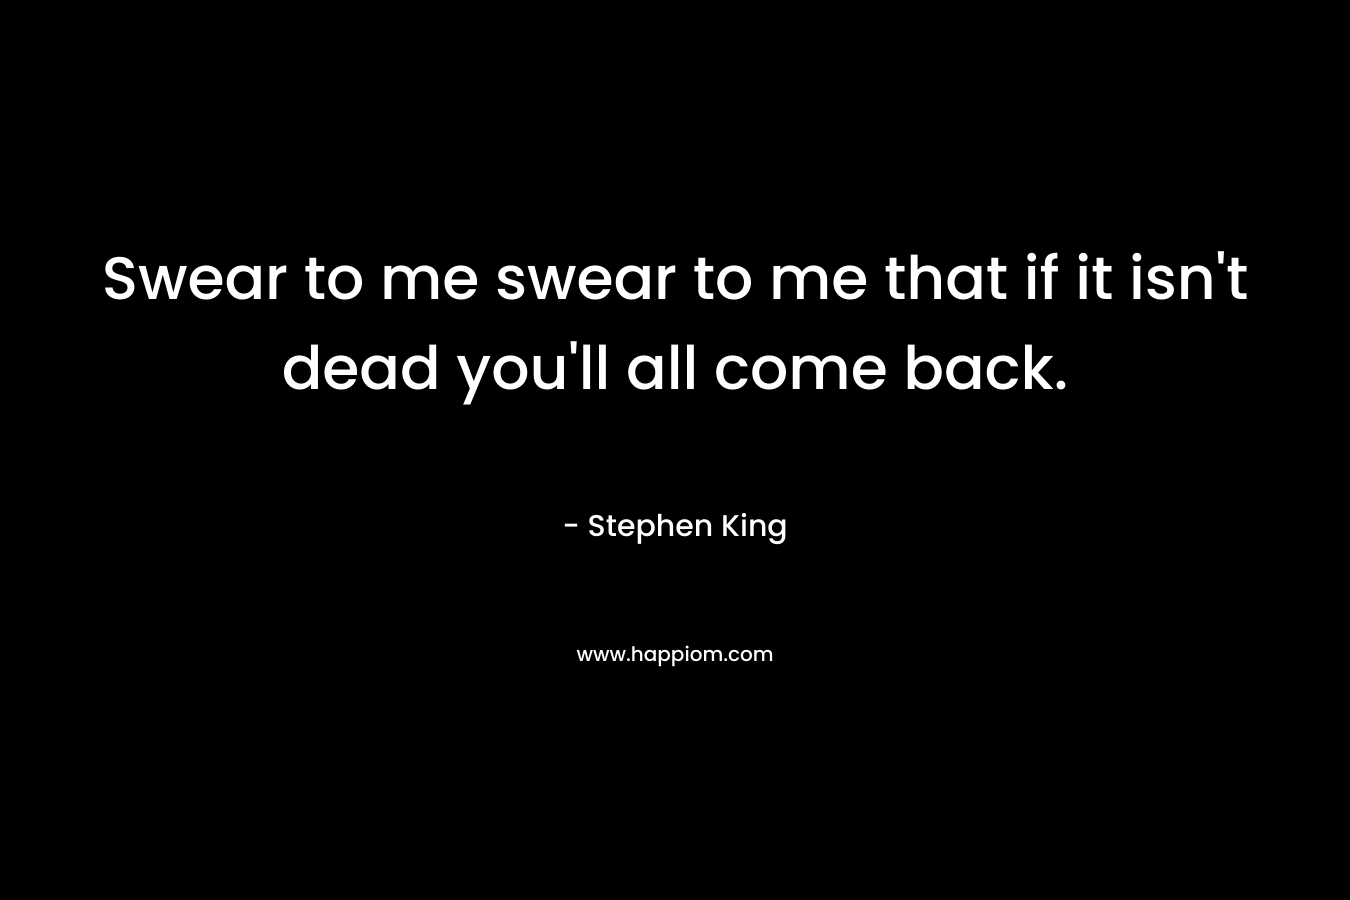 Swear to me swear to me that if it isn’t dead you’ll all come back. – Stephen King